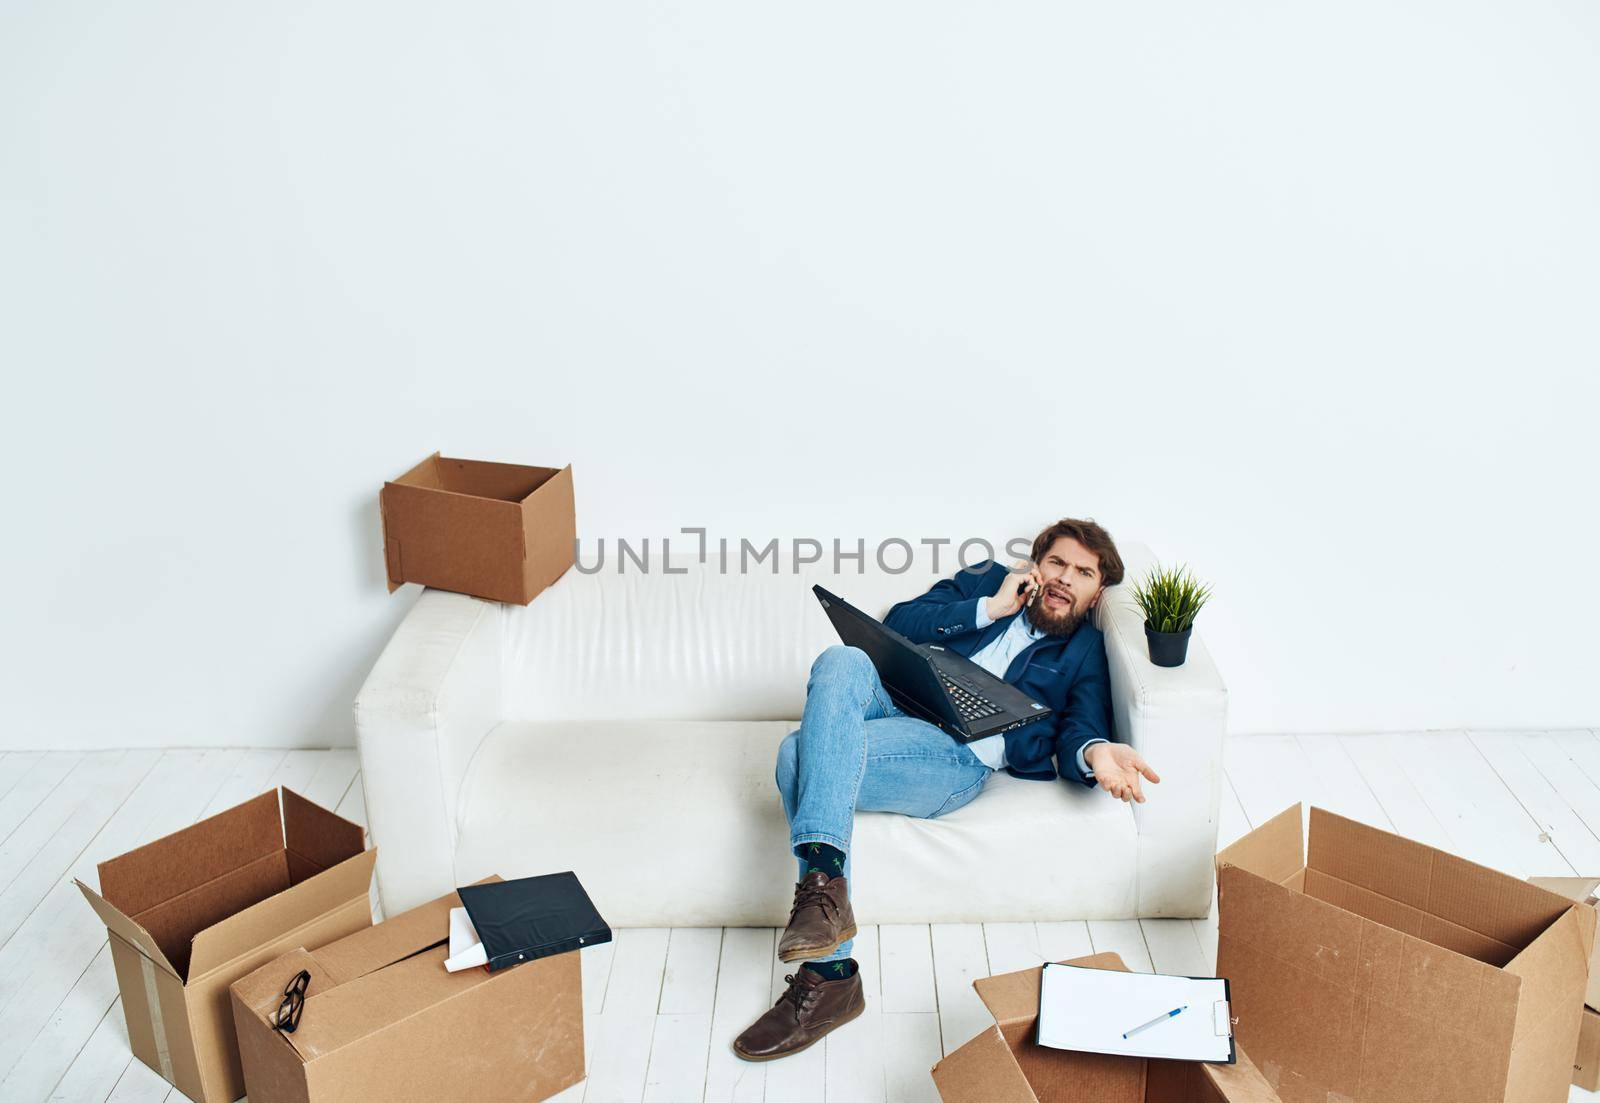 Man in a suit unpacks things emotions office technology lifestyle work in a new place. High quality photo